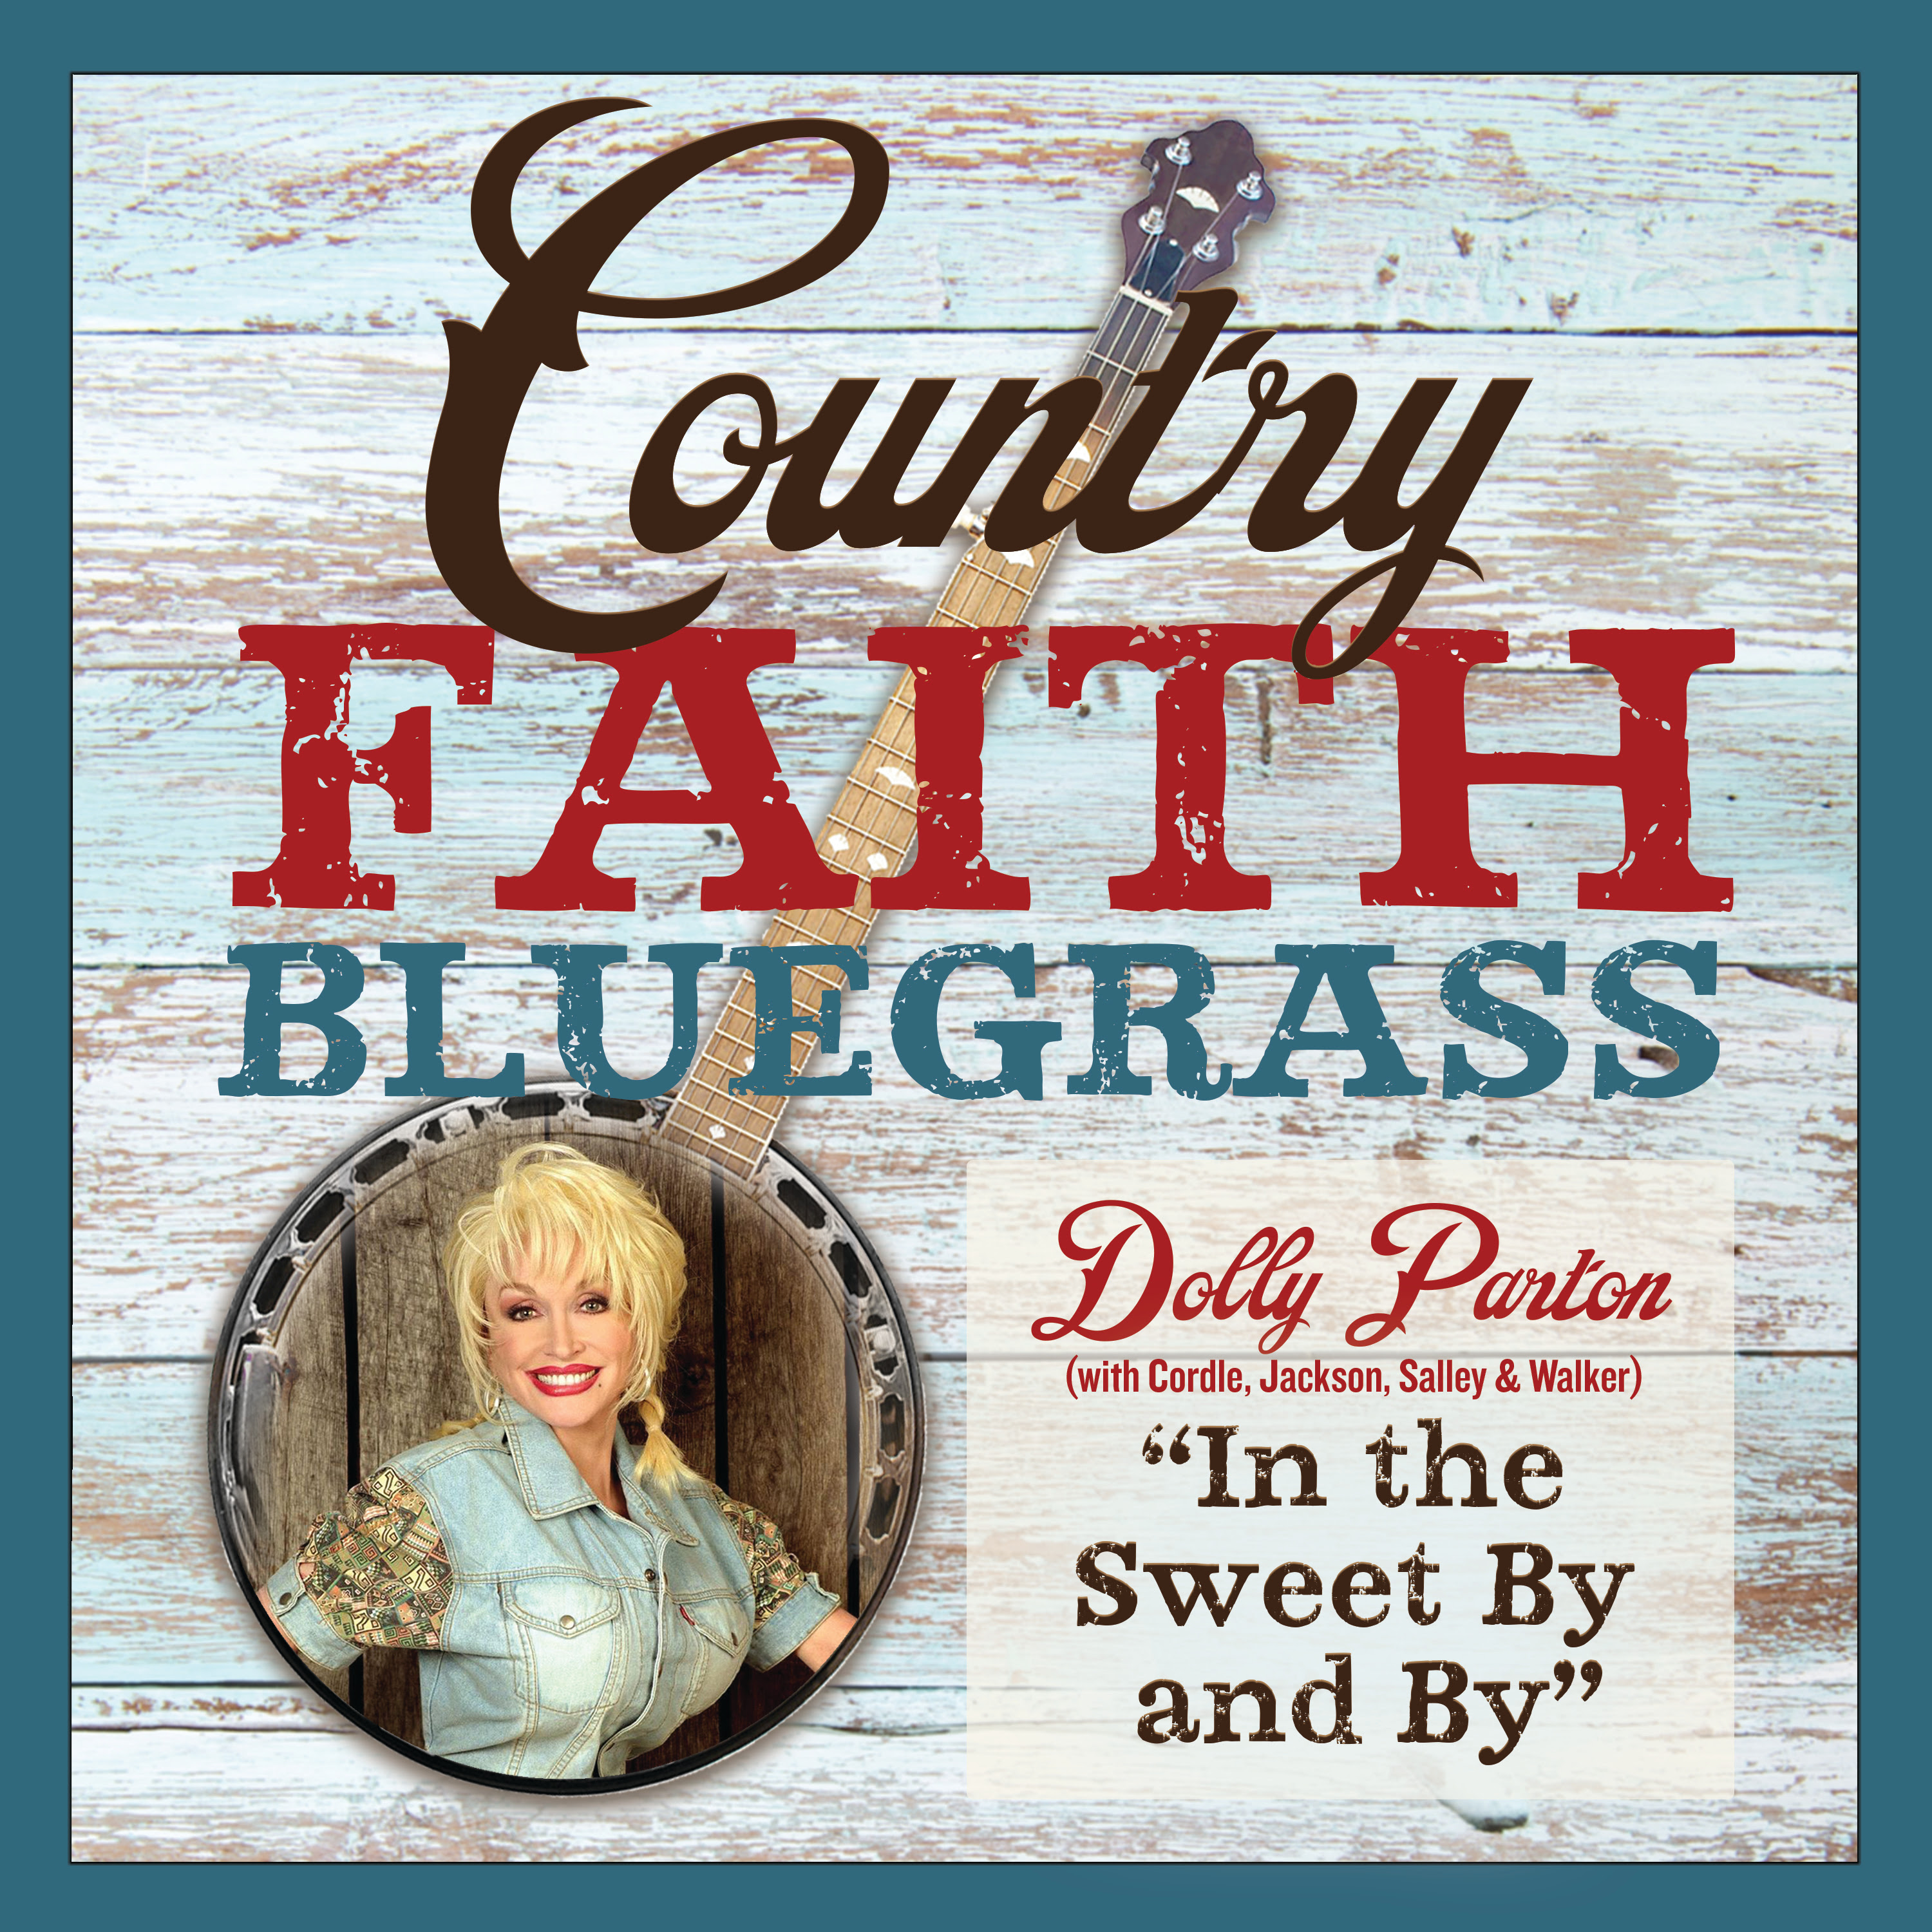 Dolly Parton's "In the Sweet By and By" with Cordle, Jackson, Salley & Walker from 'Country Faith Bluegrass'